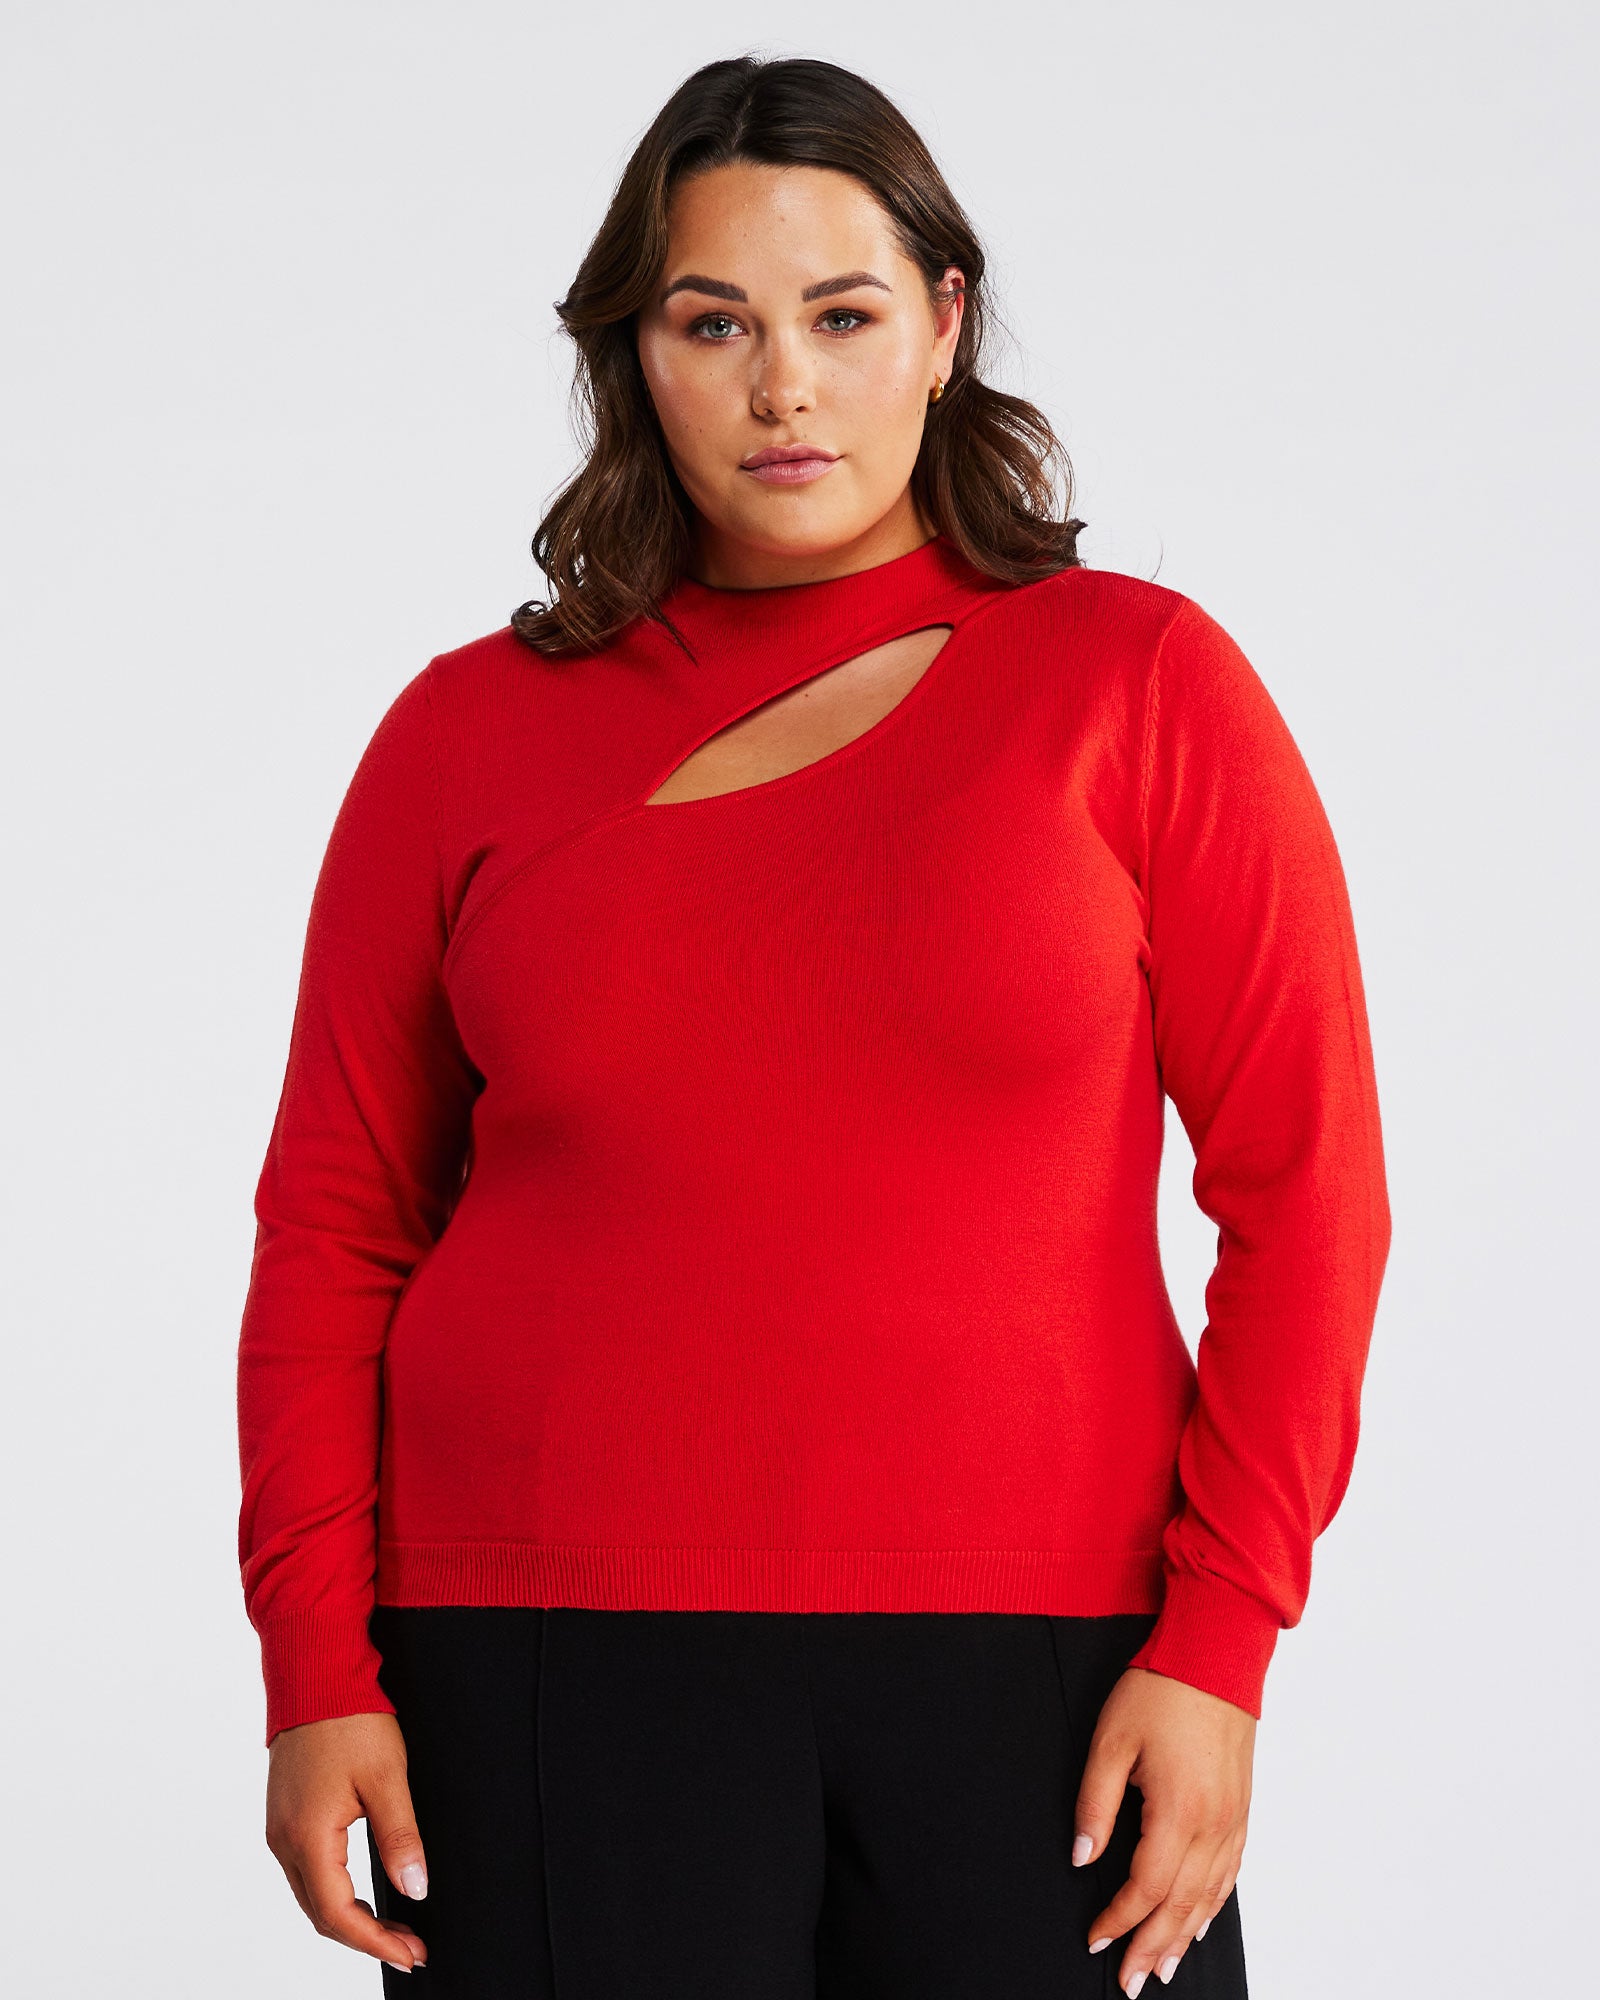 A woman in an Orange Cut Out Crewneck Sweater.